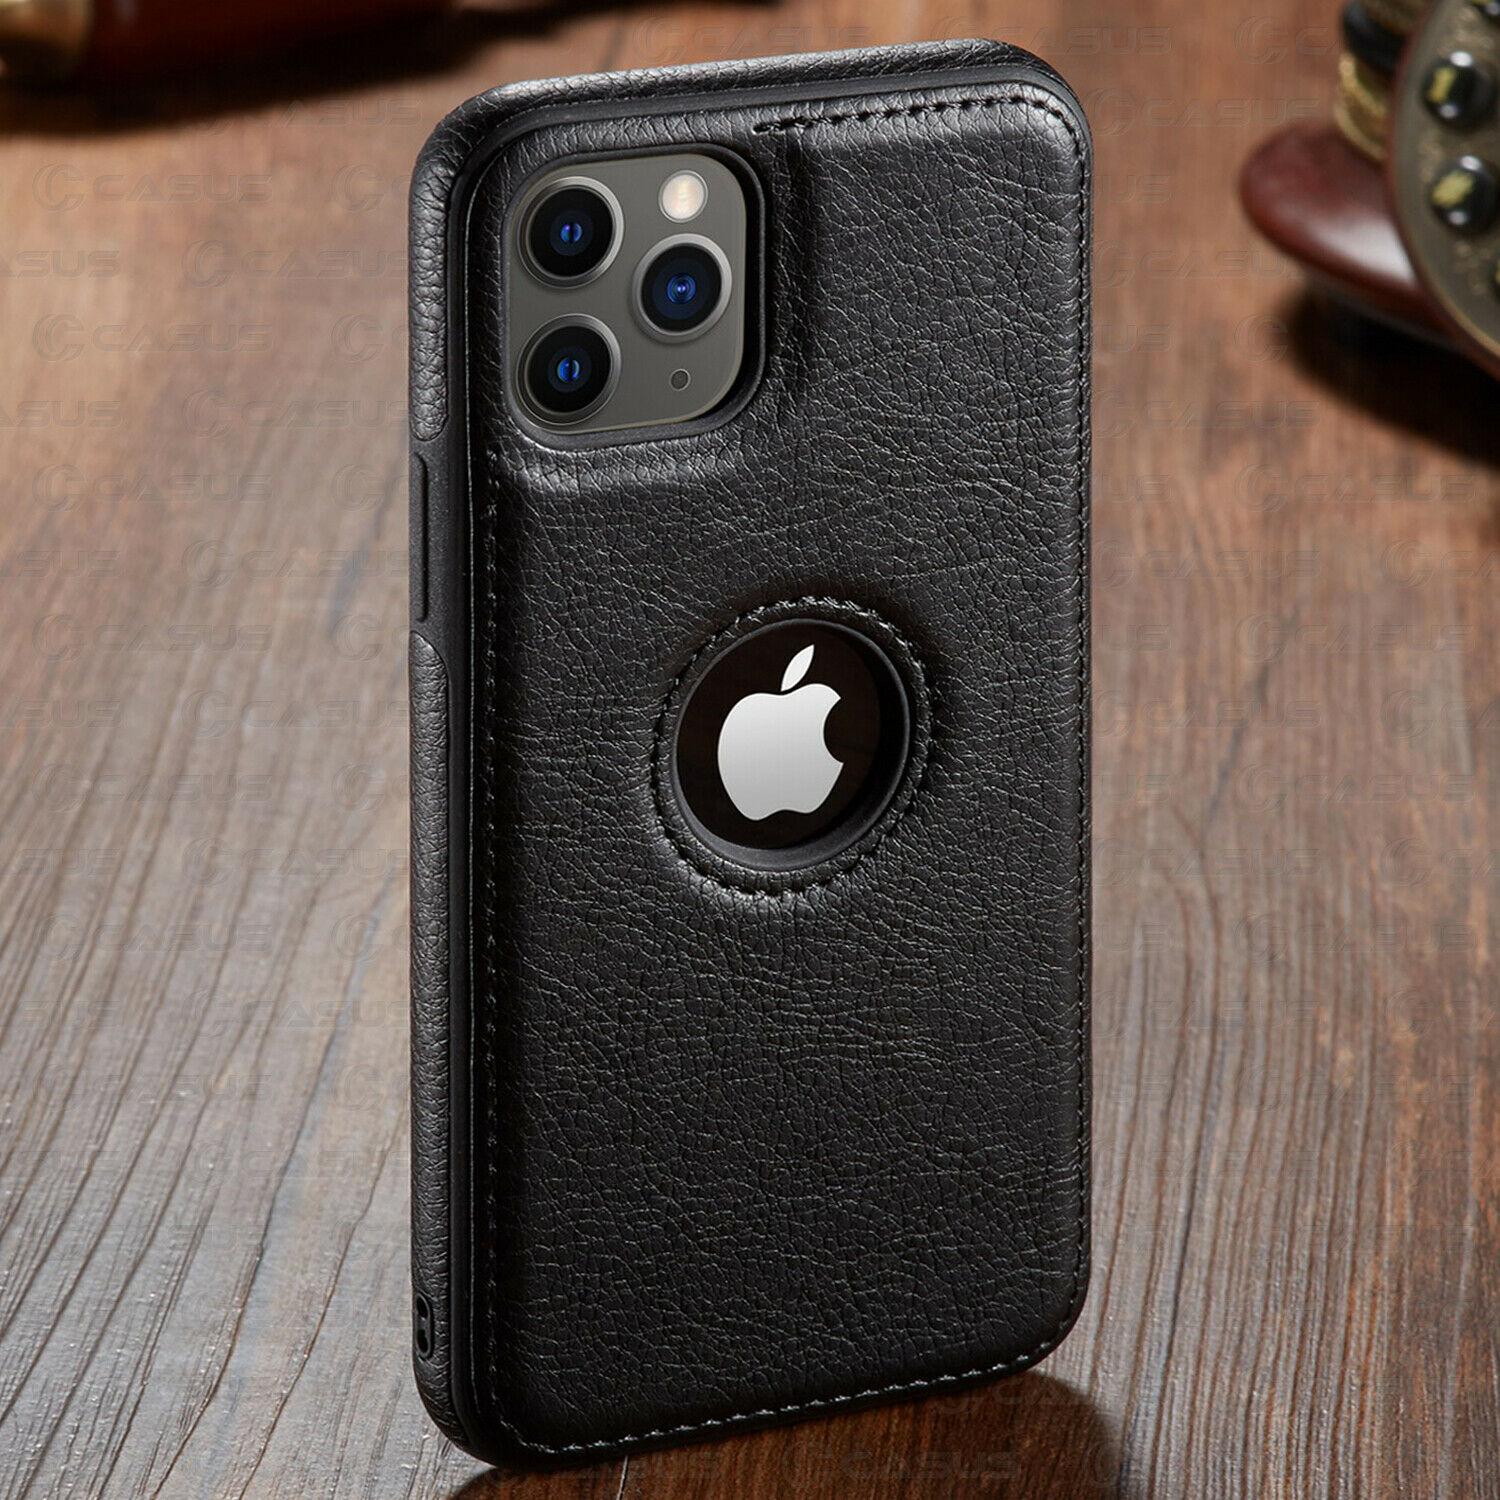 For iPhone 11 11 Pro 11 Pro Max Case Luxury Vintage PU Leather Back Thin Case Cover for iphone XS Max XR X 8 7 6 6S Plus Case